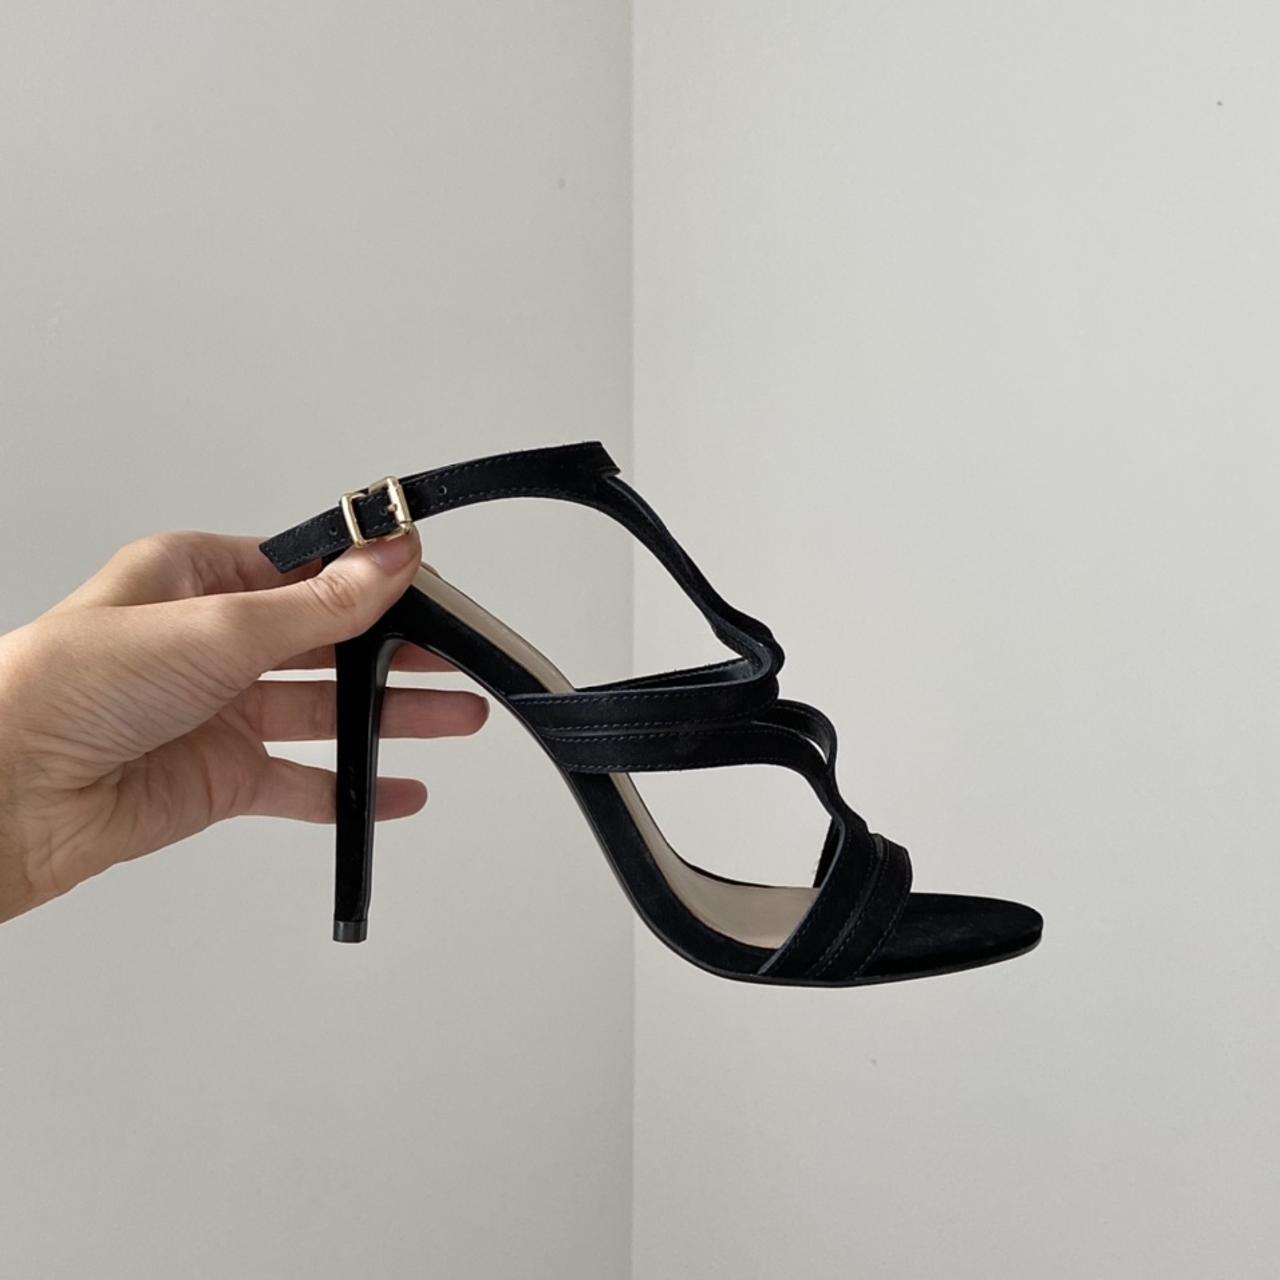 New office black straps heels • received as a gift... - Depop